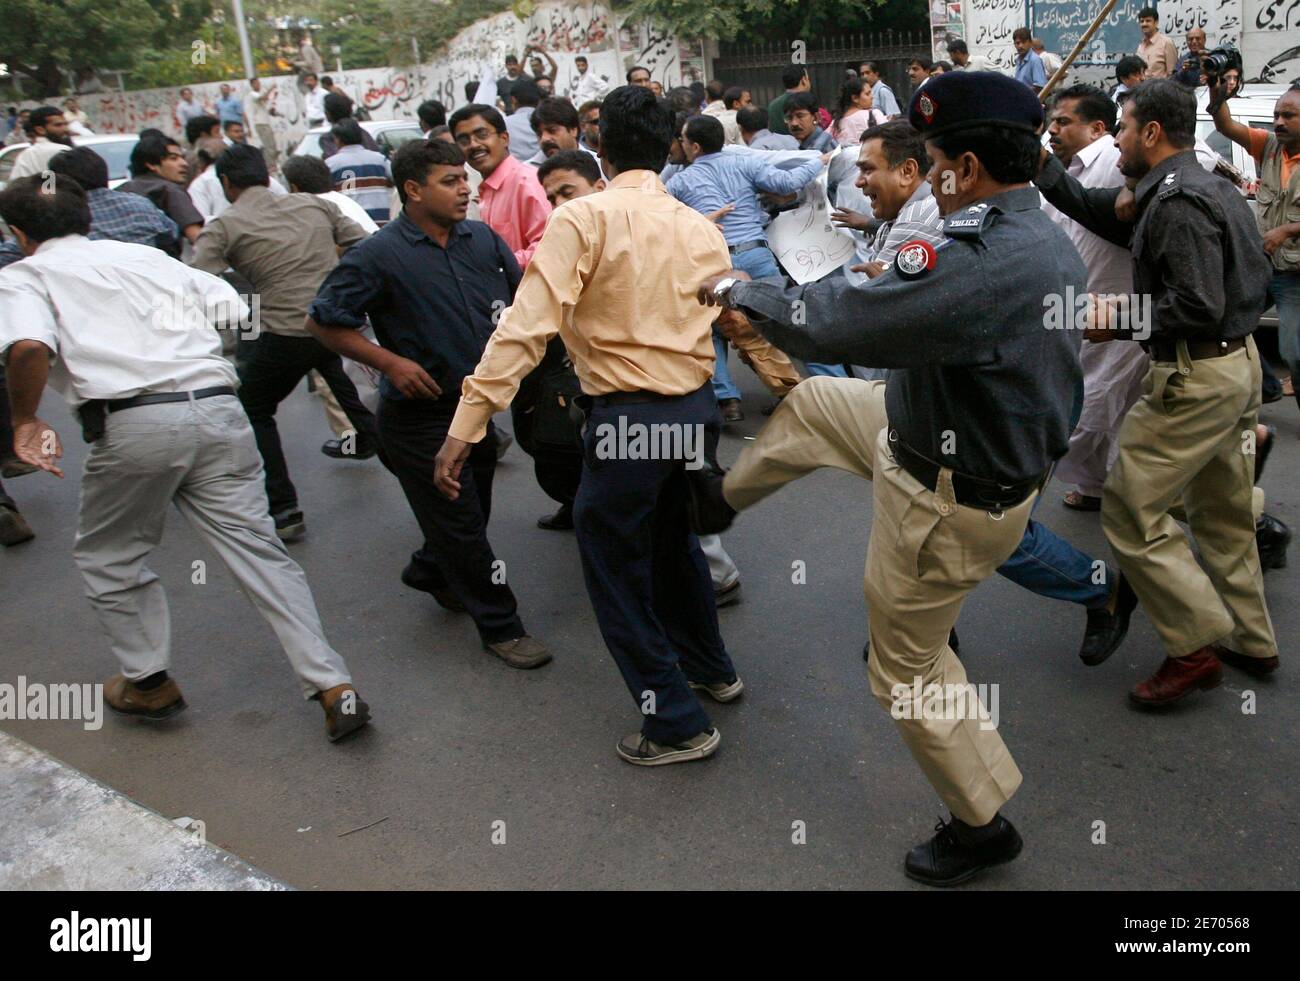 police-charge-towards-journalists-who-are-trying-protest-against-media-curbs-and-emergency-rule-in-karachi-november-20-2007-over-a-dozen-members-of-the-media-were-detained-four-were-injured-and-over-a-hundred-gave-themselves-up-for-arrests-in-protest-after-clashing-with-police-outside-the-press-club-in-karachi-witnesses-said-reutersathar-hussain-pakistan-2E70568.jpg